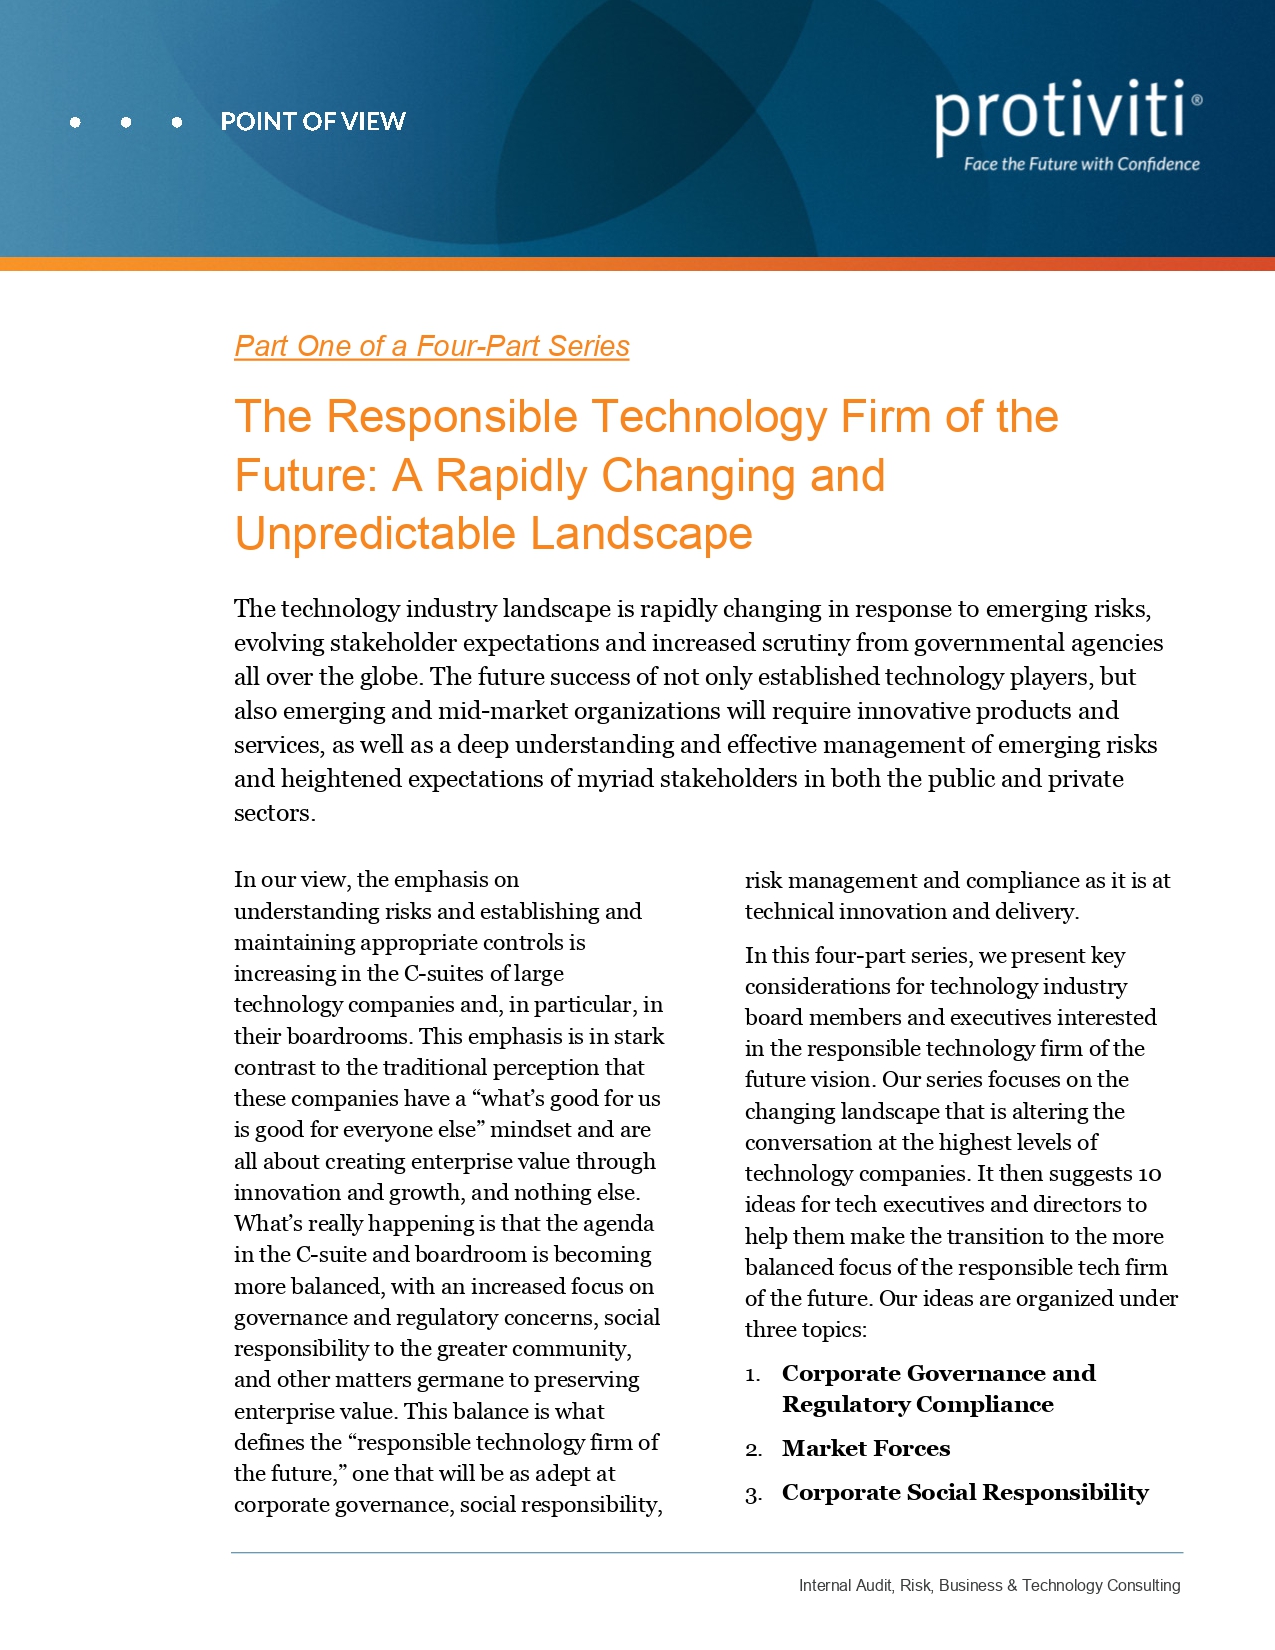 Screenshot of the first page of The Responsible Technology Firm of the Future - A Rapidly Changing and Unpredictable Landscape